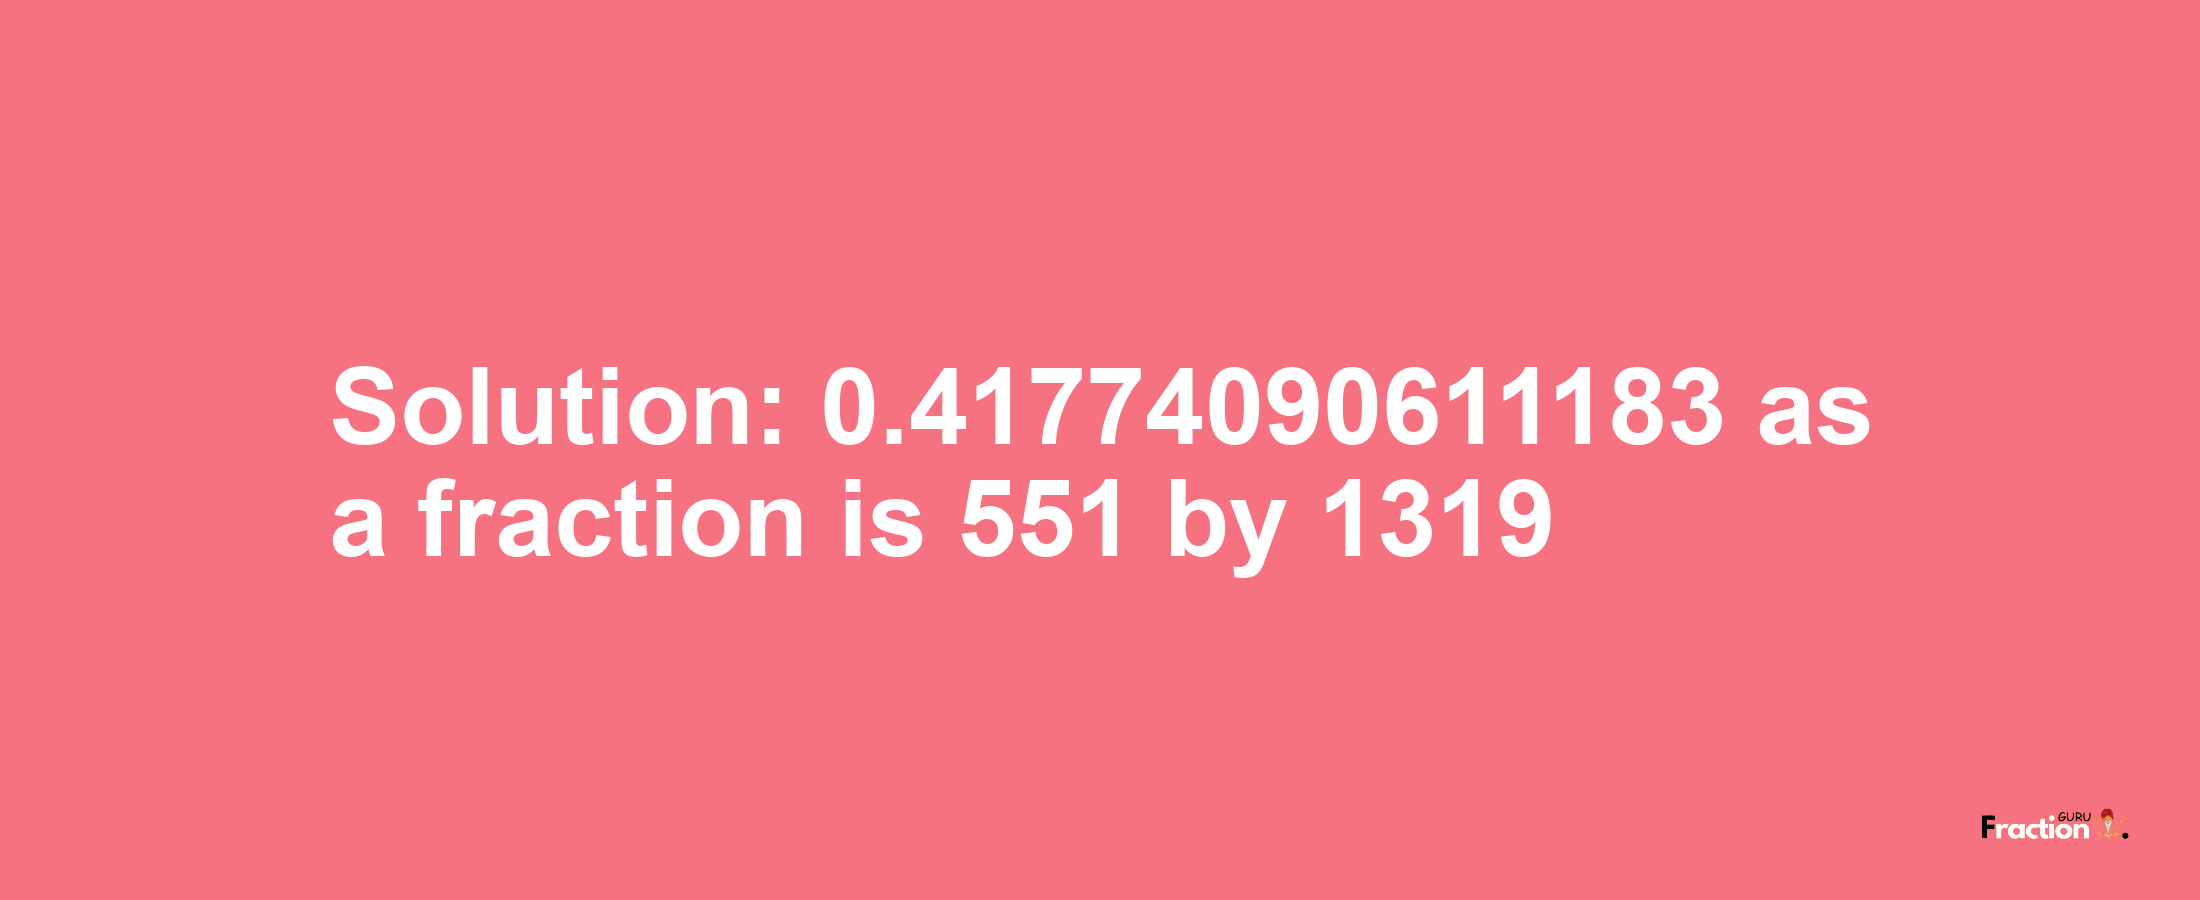 Solution:0.41774090611183 as a fraction is 551/1319